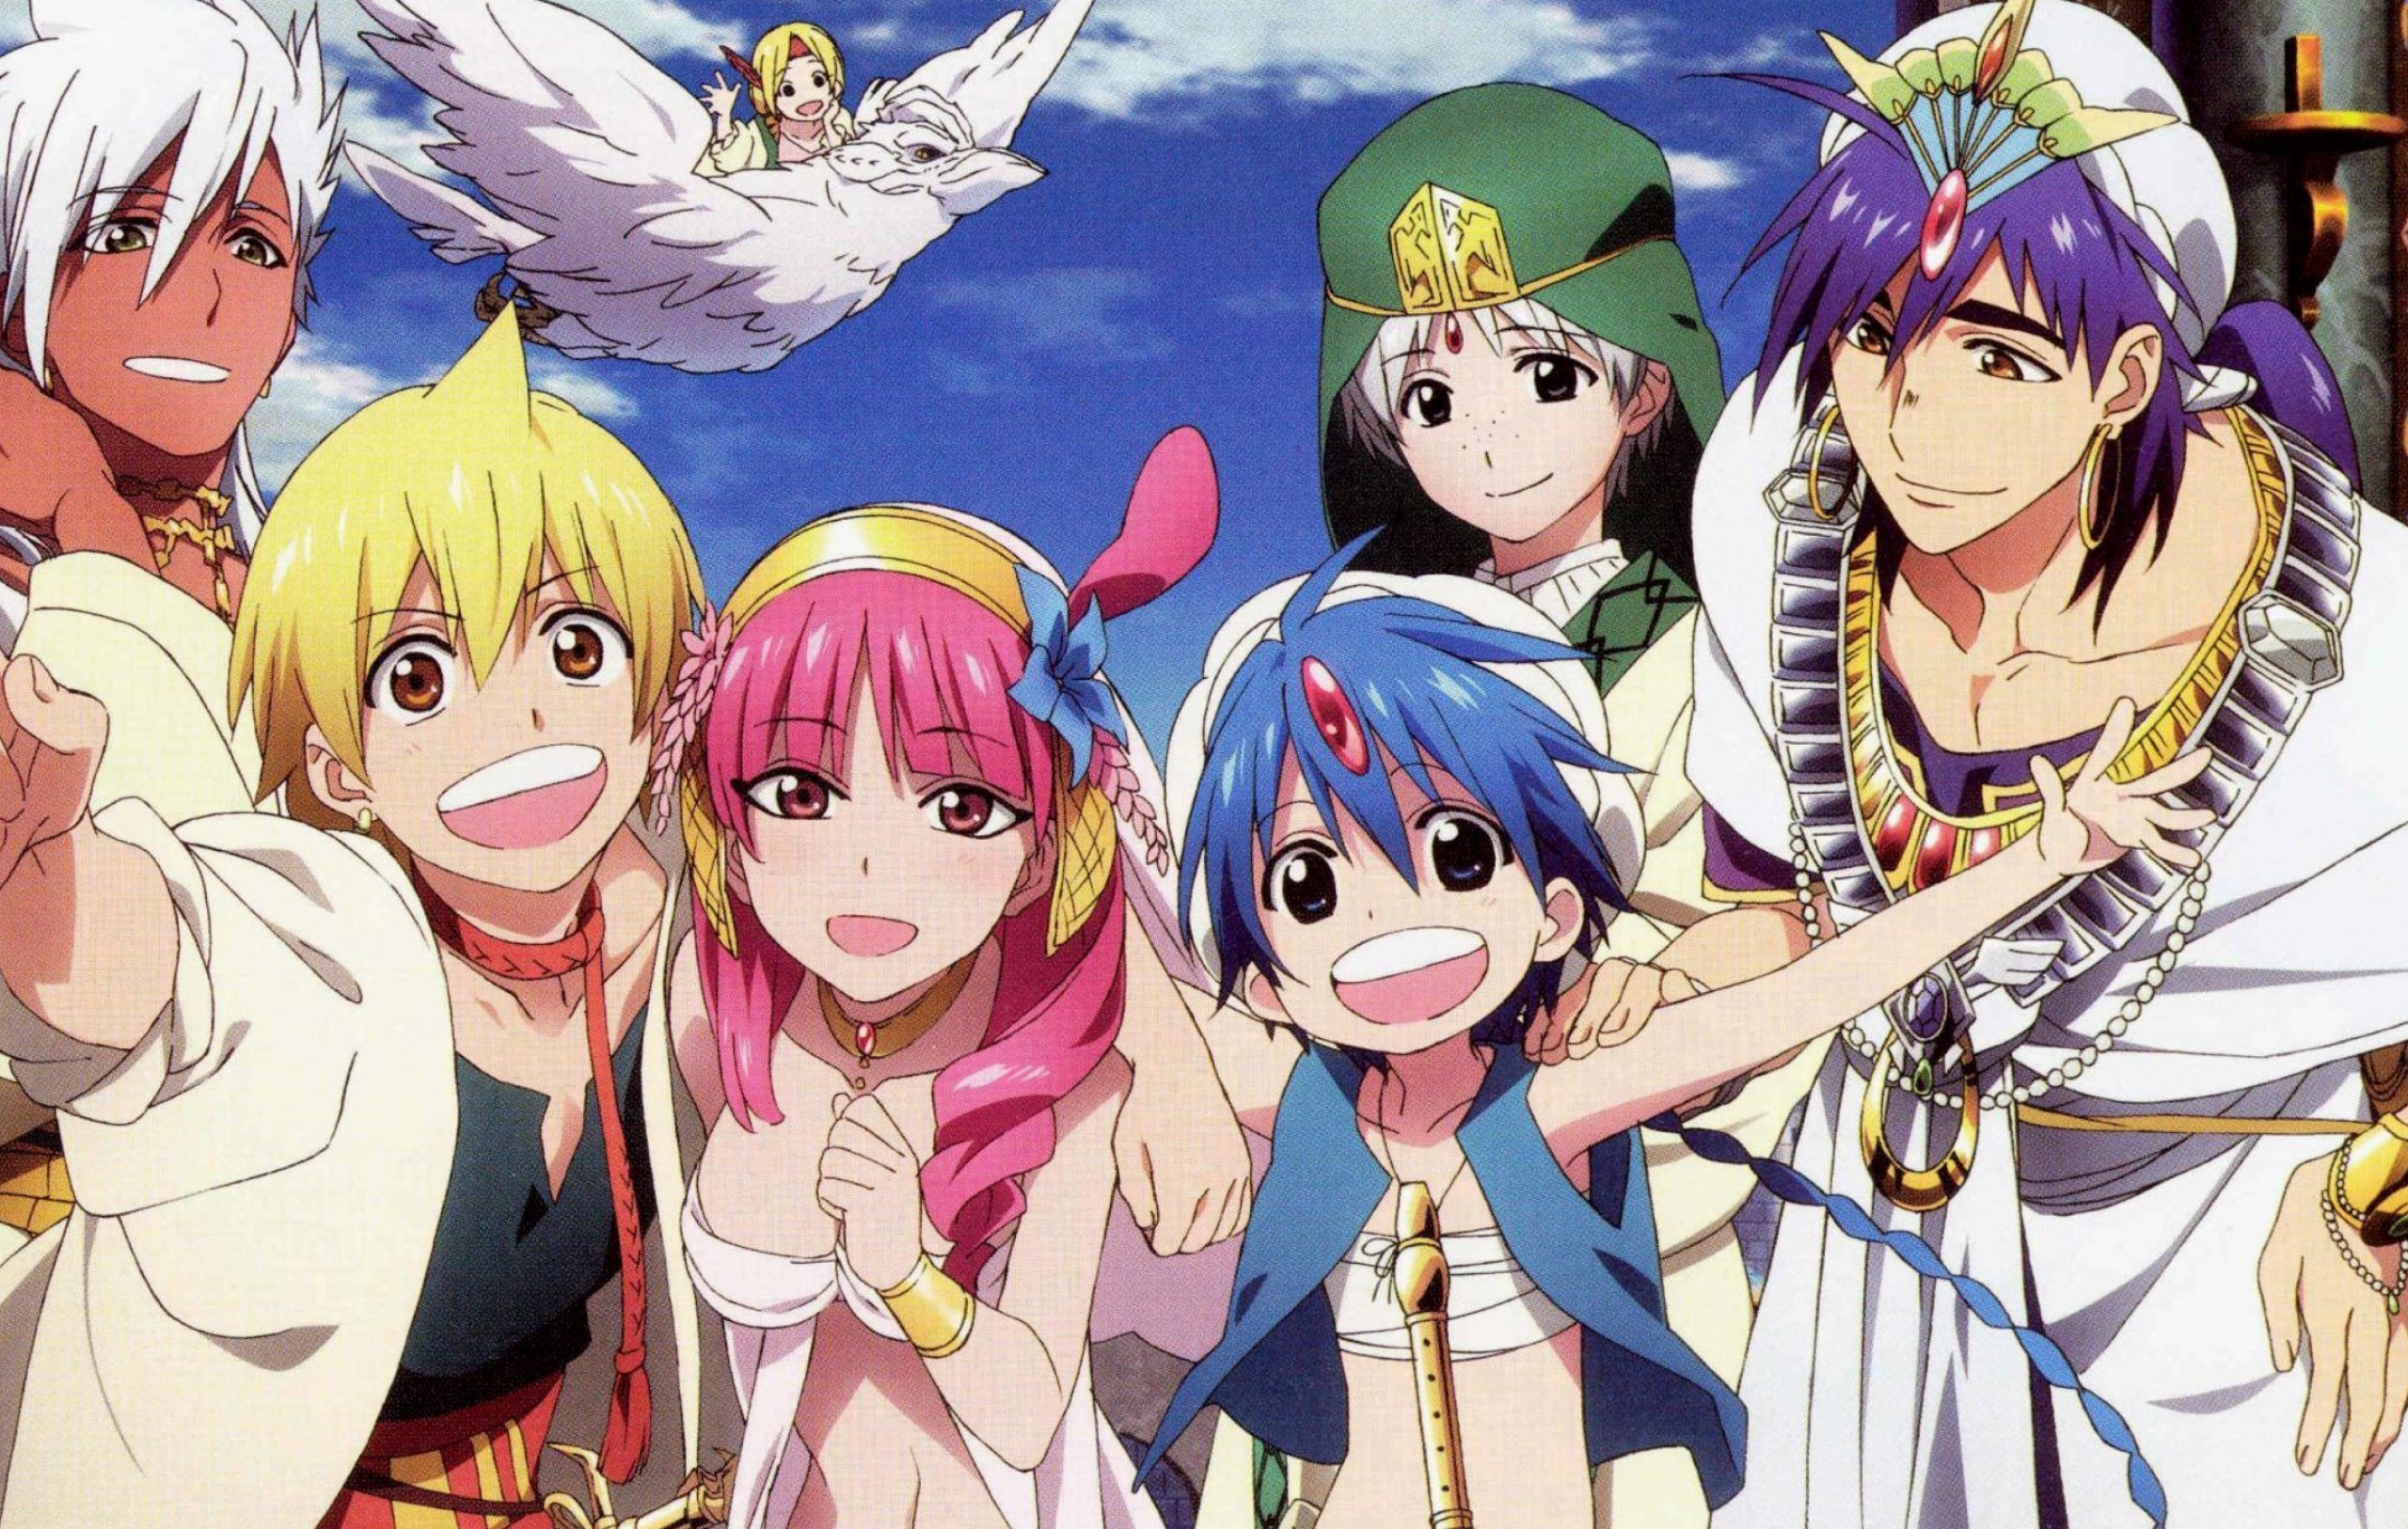 Magi: The Labyrinth of Magic, Anime, Sinbad wallpapers, Backgrounds, 2560x1630 HD Desktop